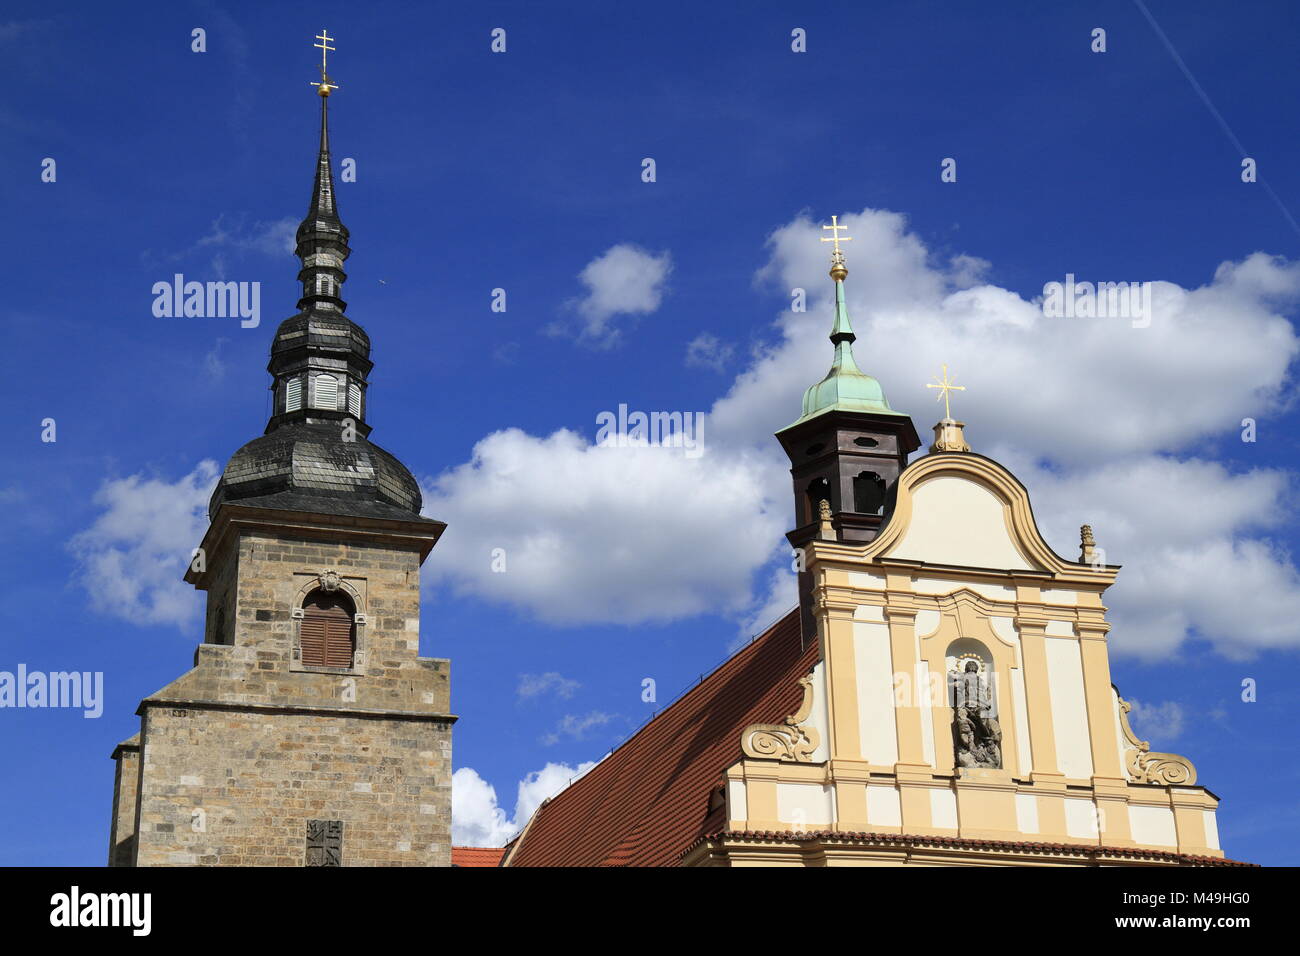 Neogothic church of The Virgin Mary and monastery in Pilsen Stock Photo